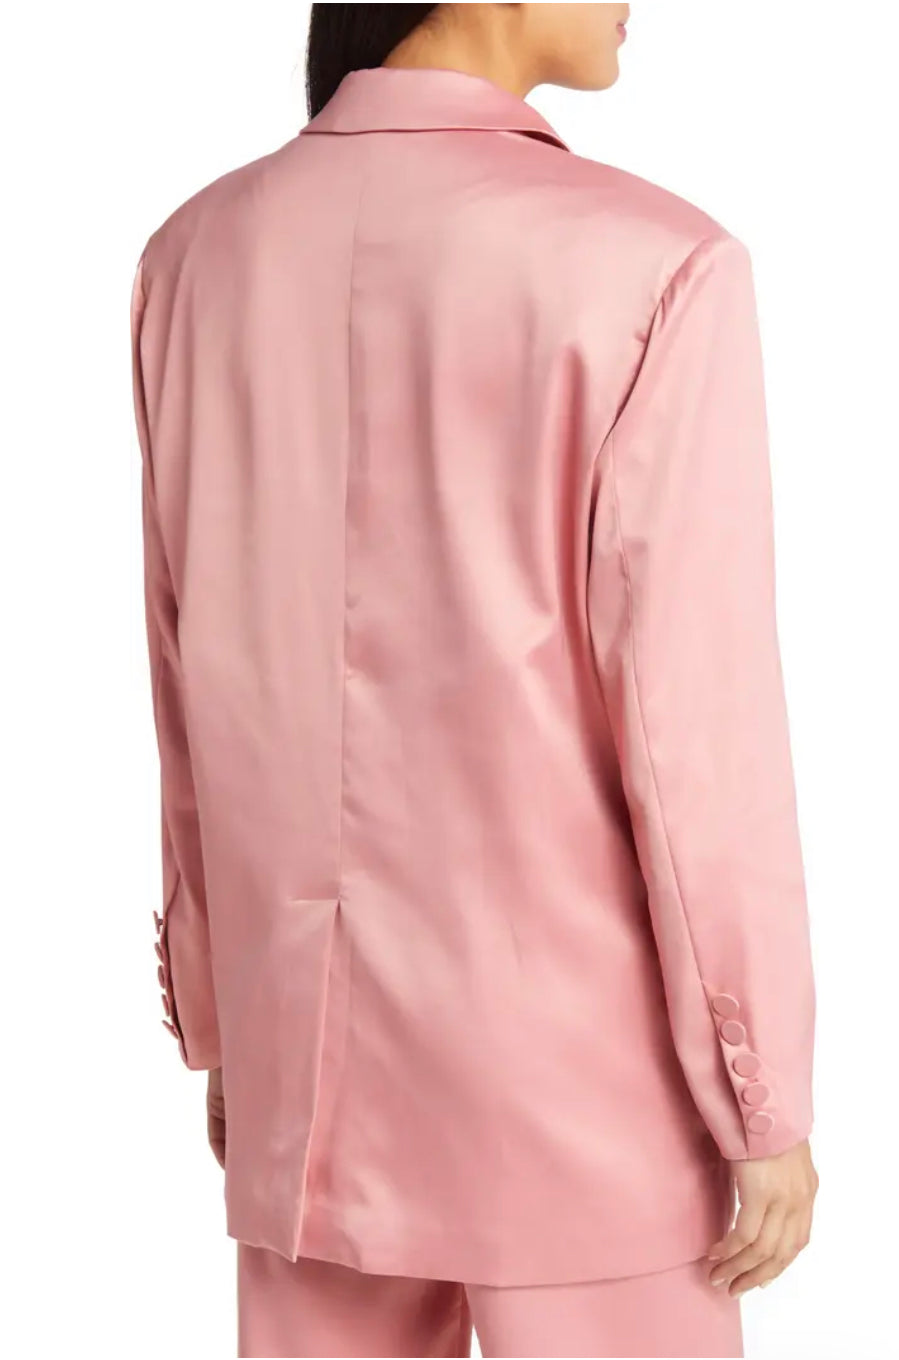 Mira Pink Double-Breasted Blazer